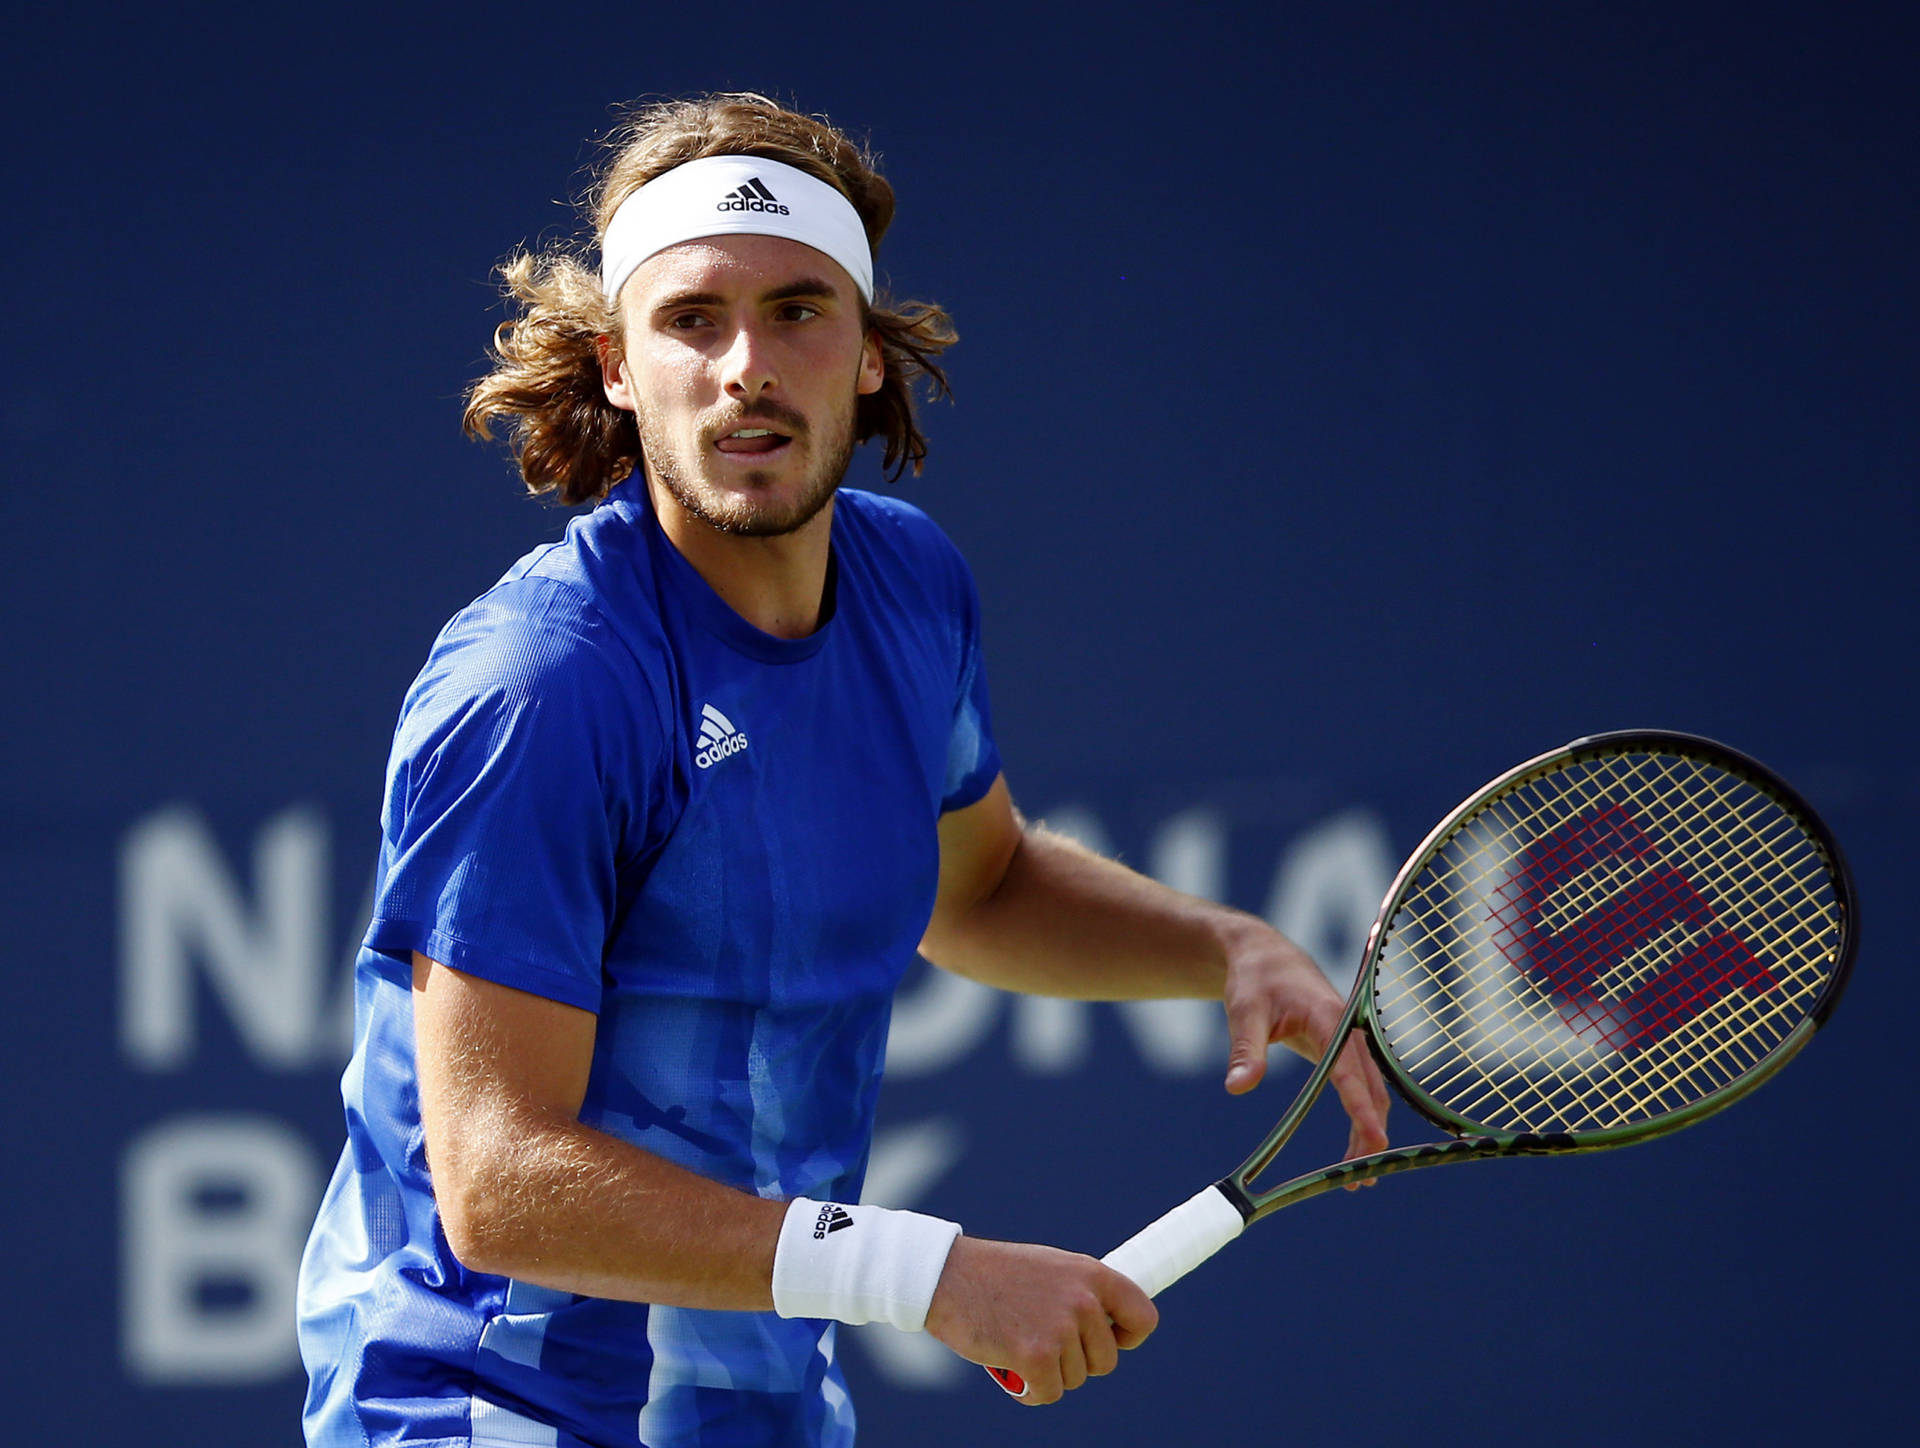 Usopen Stefanos Tsitsipas Can Be Translated To German As 